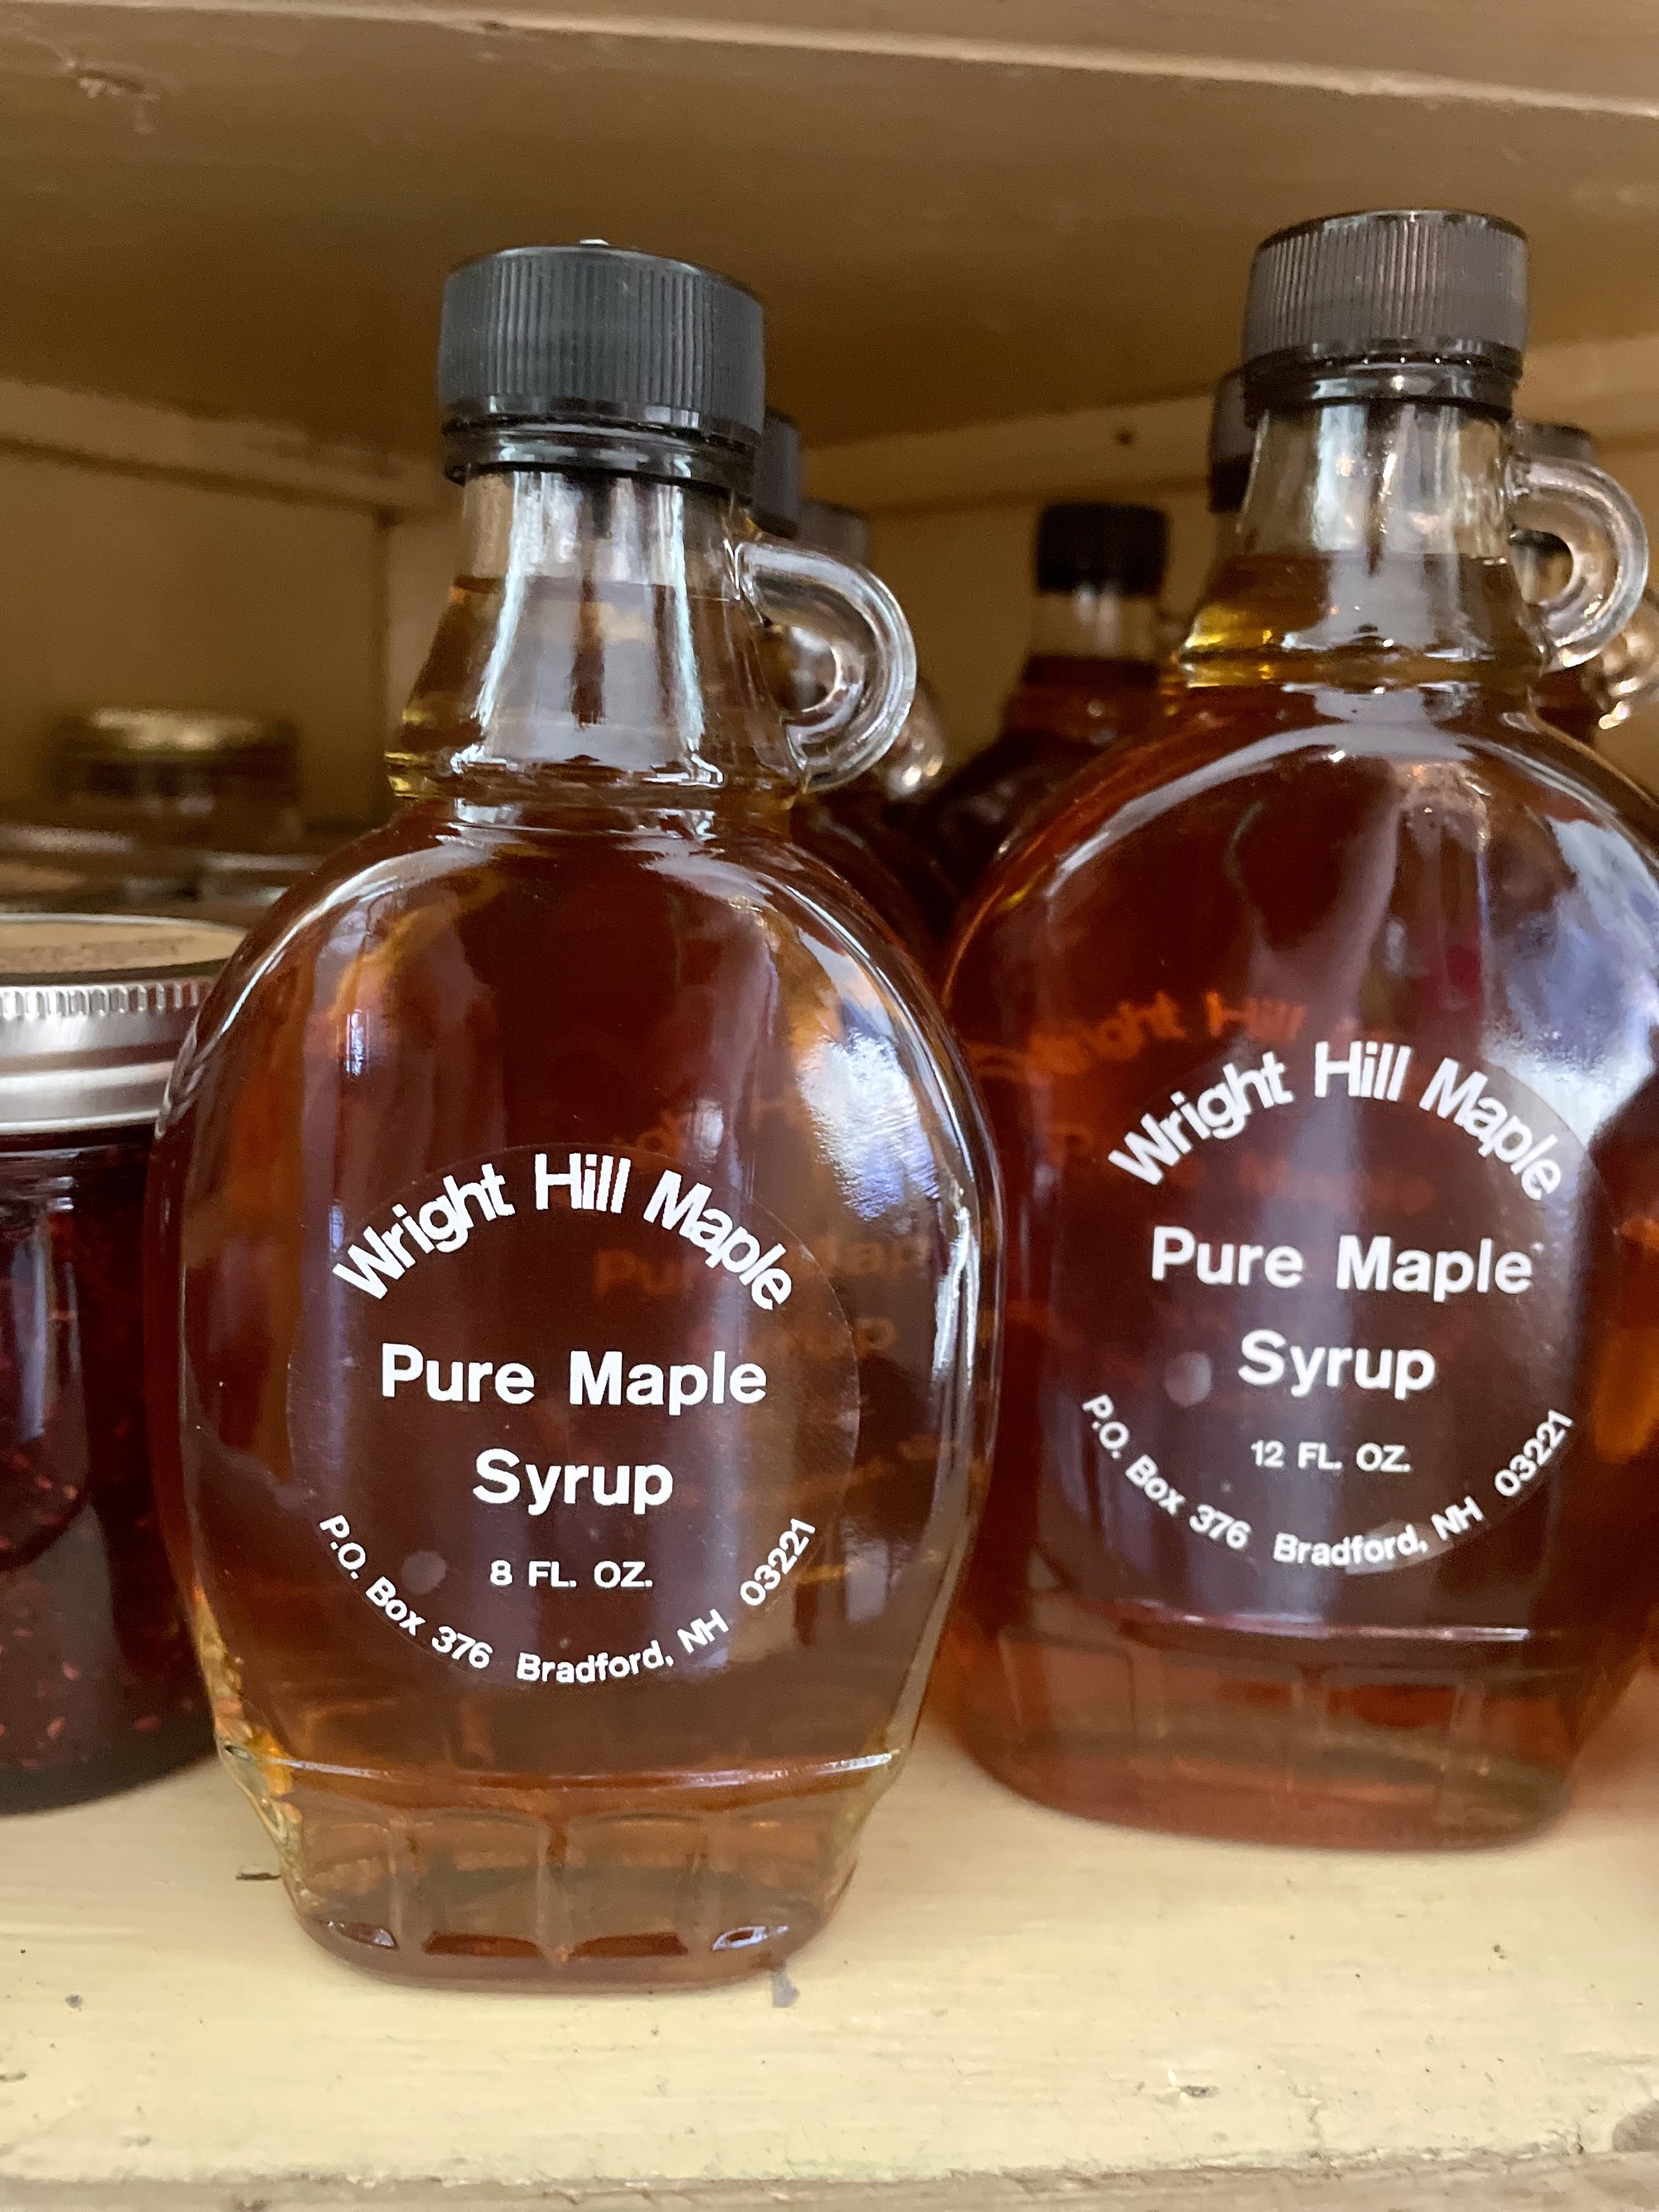 Maple Syrup - an NH classic!